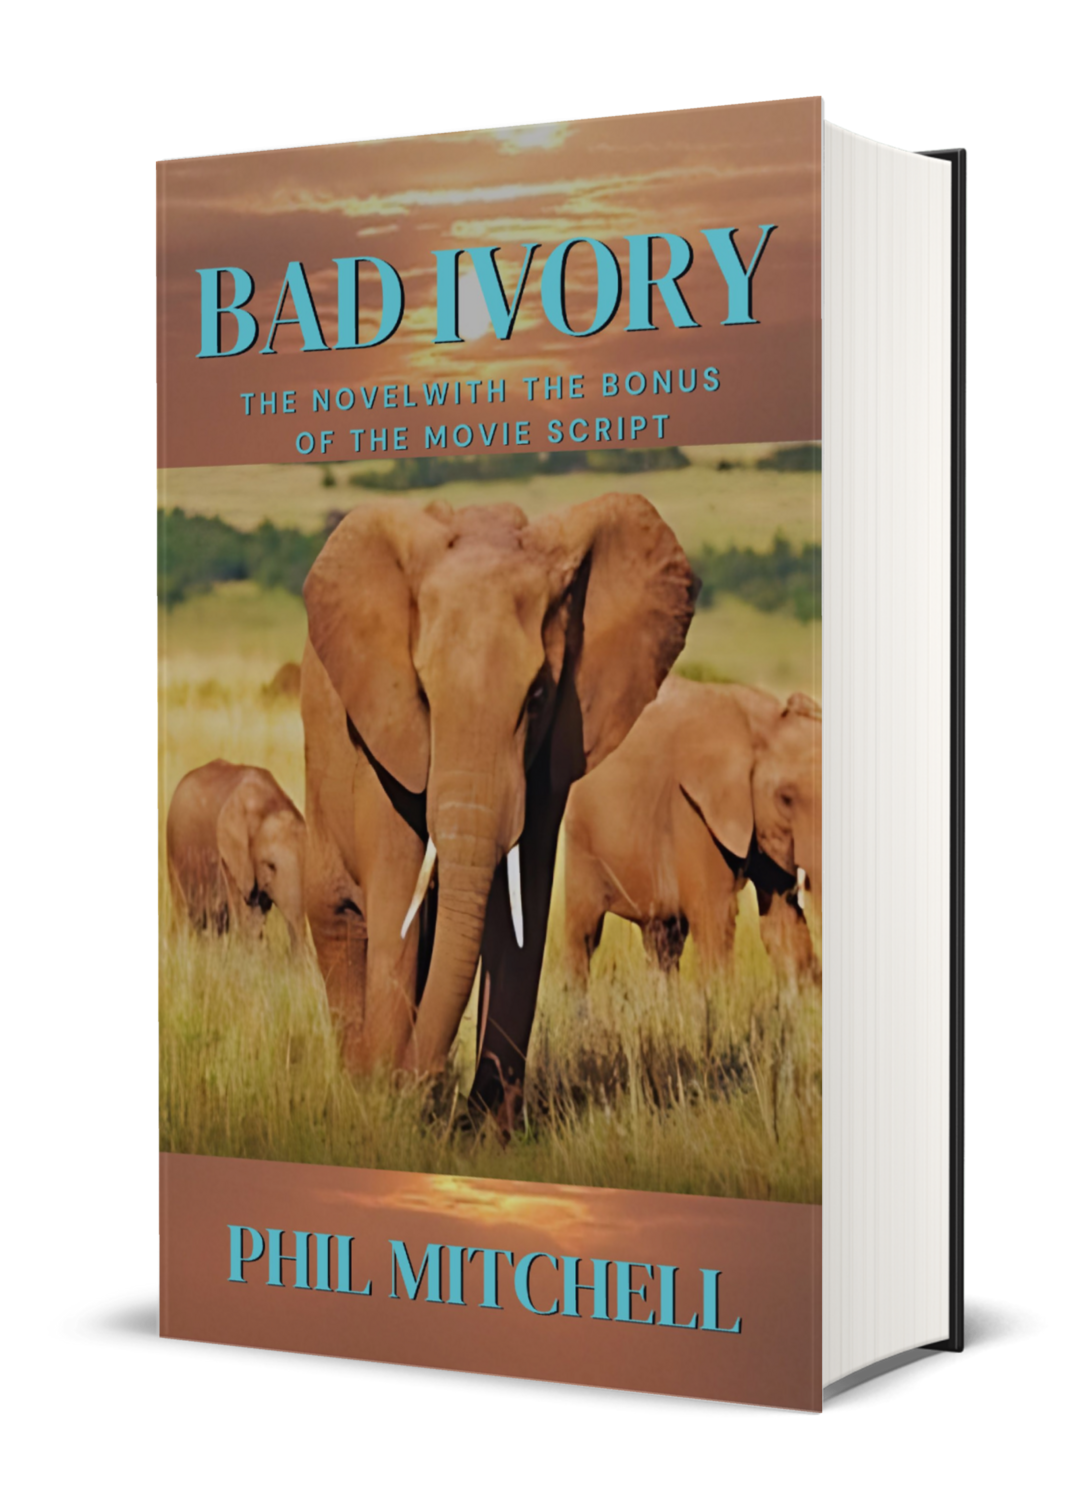 eBook: "Bad Ivory: The Novel and The Movie Script"